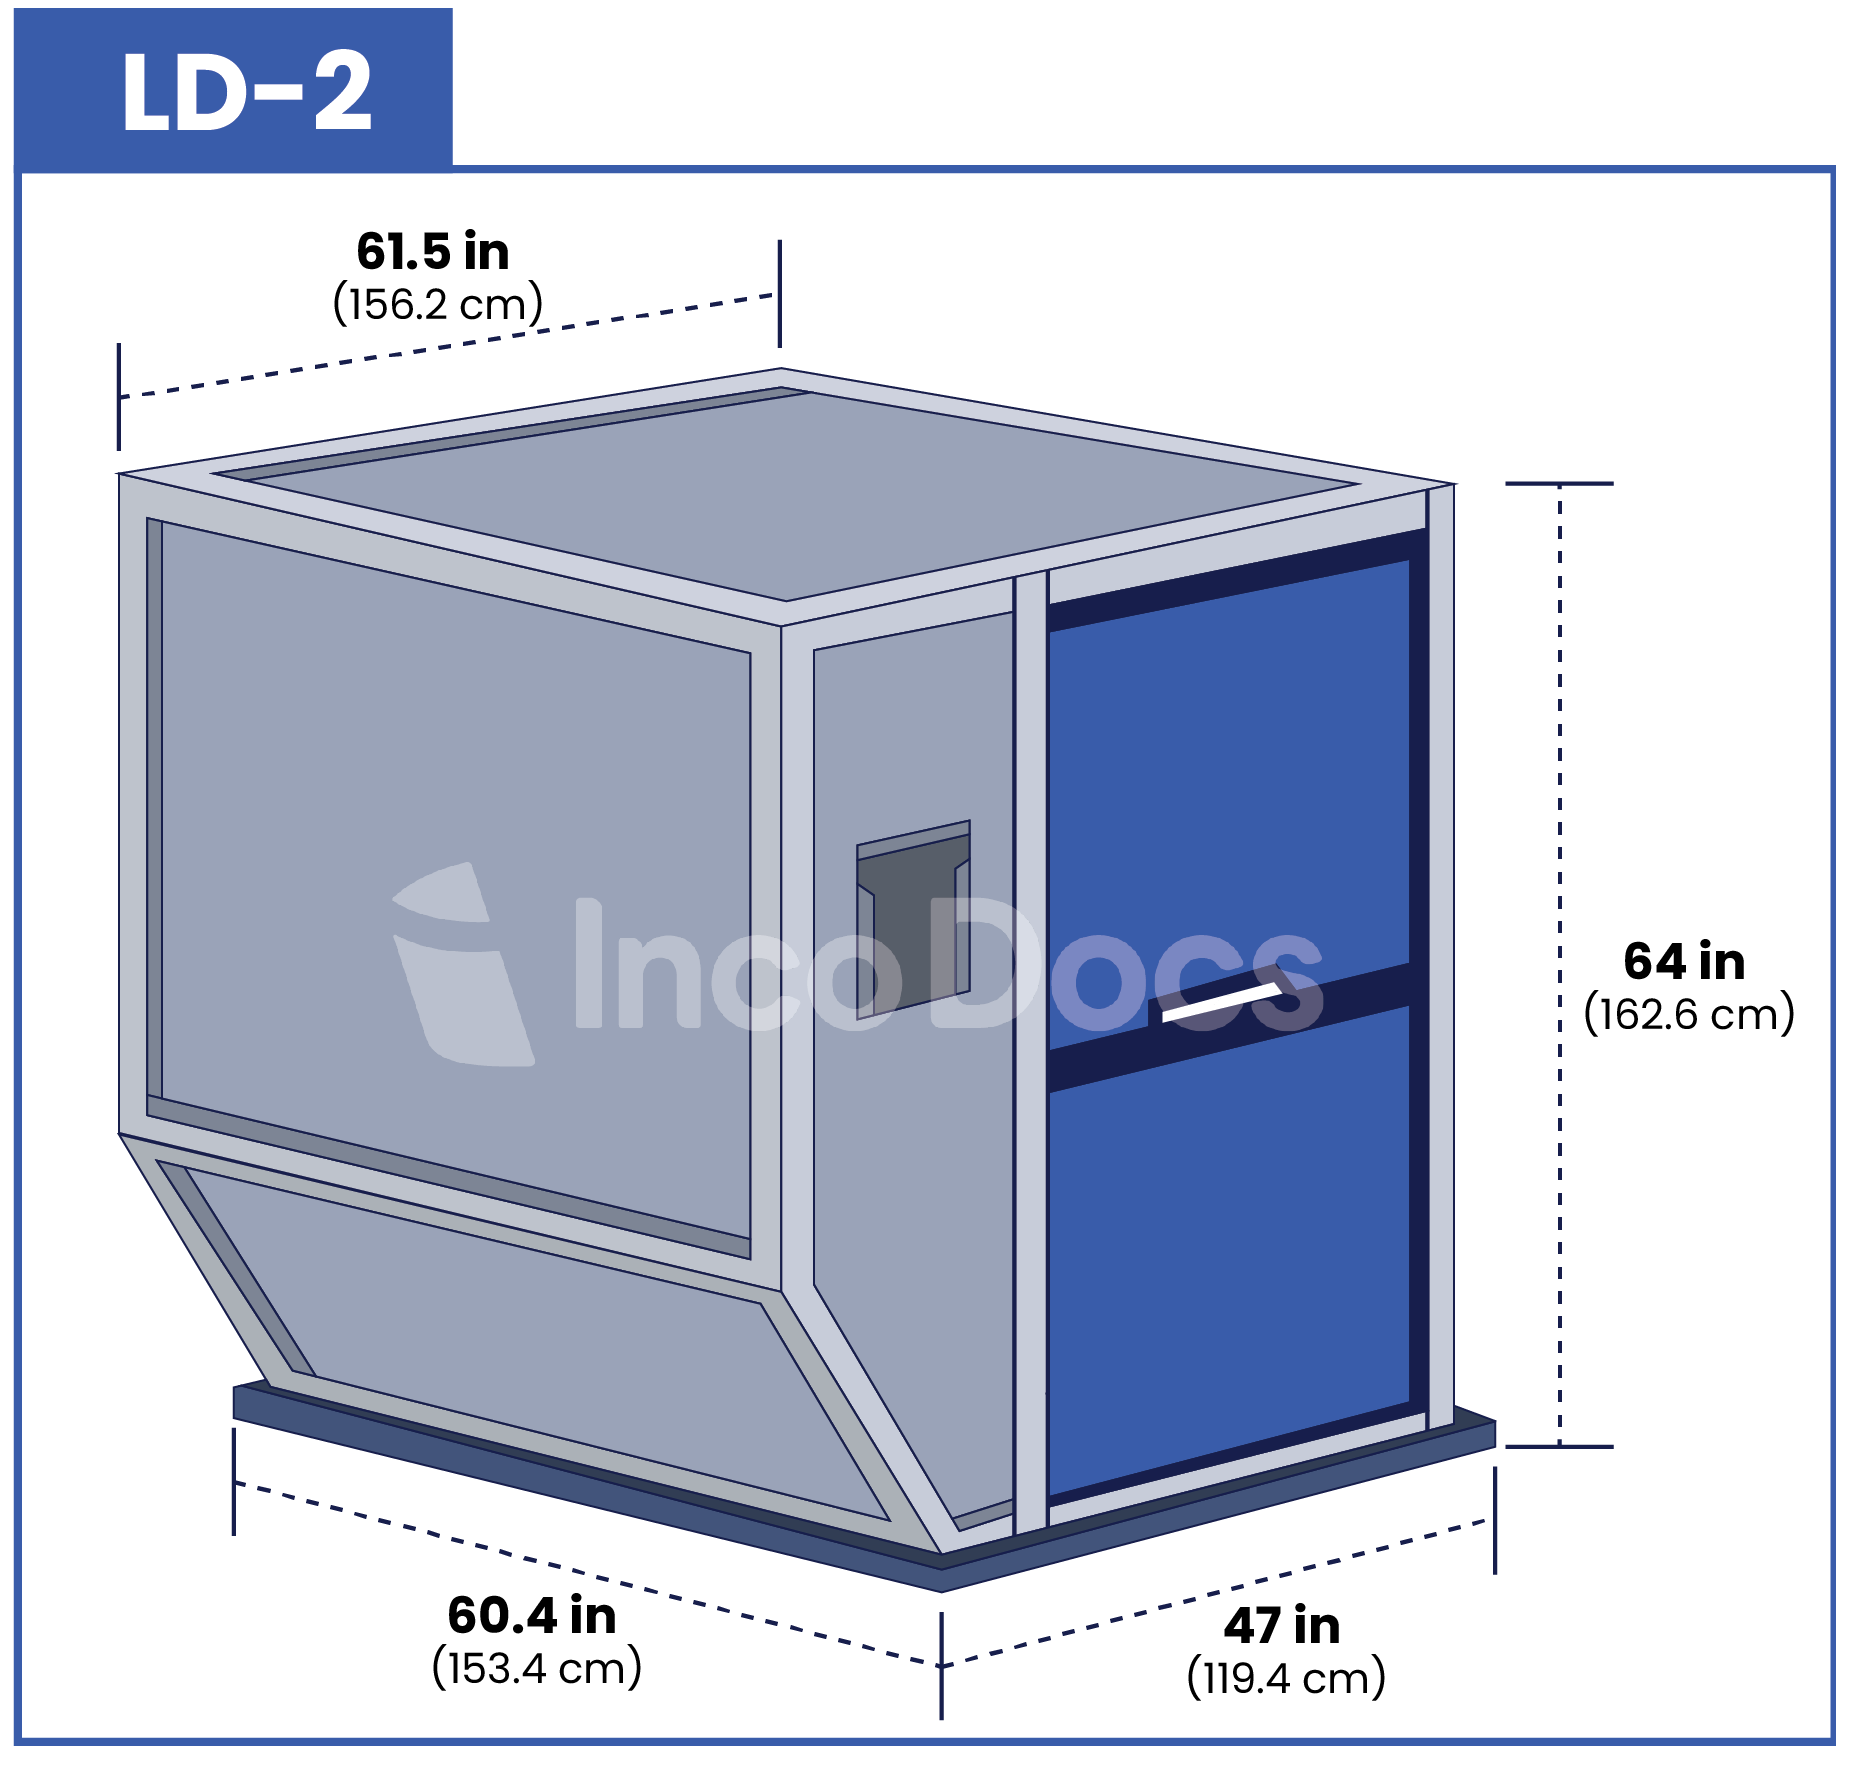 ULD LD-2 Air Container